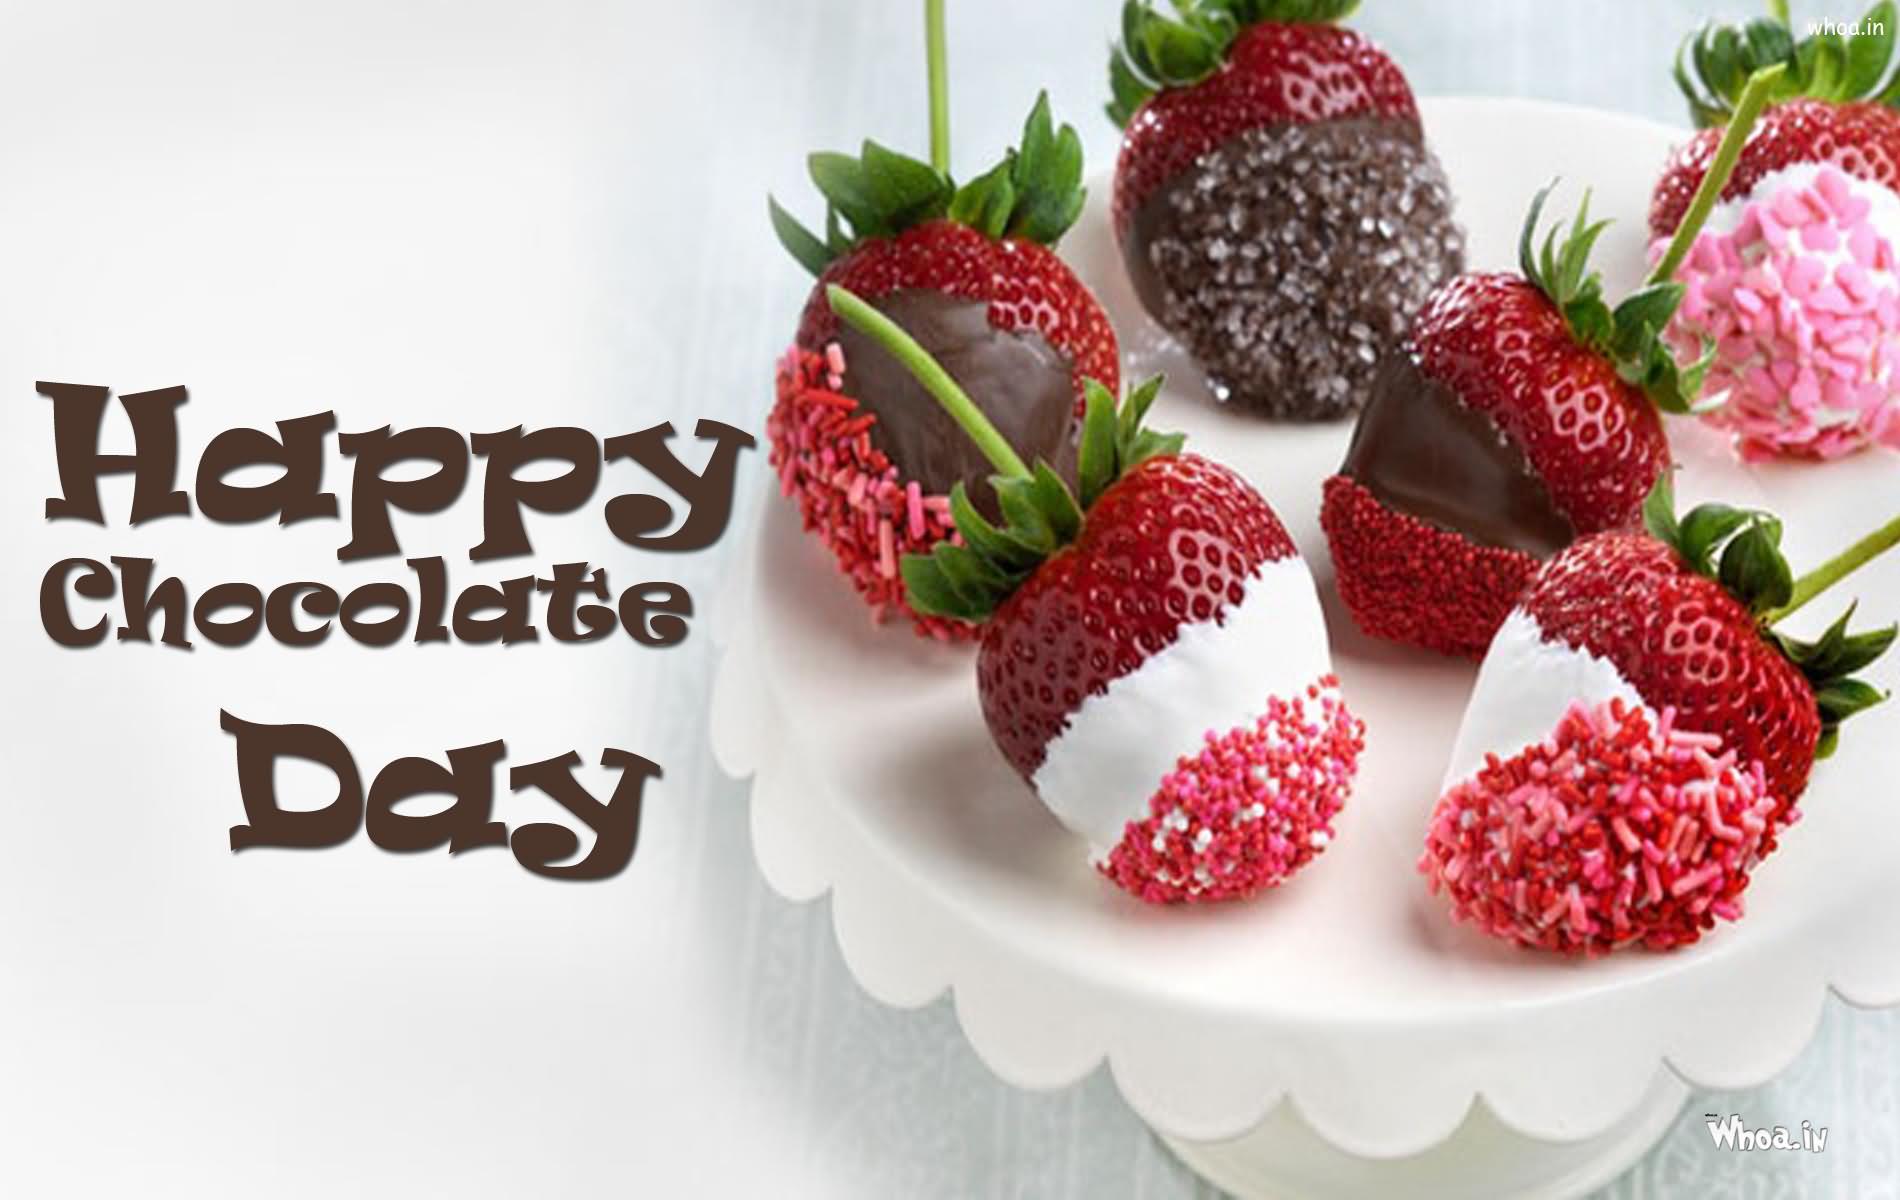 Happy Chocolate Day Strawberries Picture